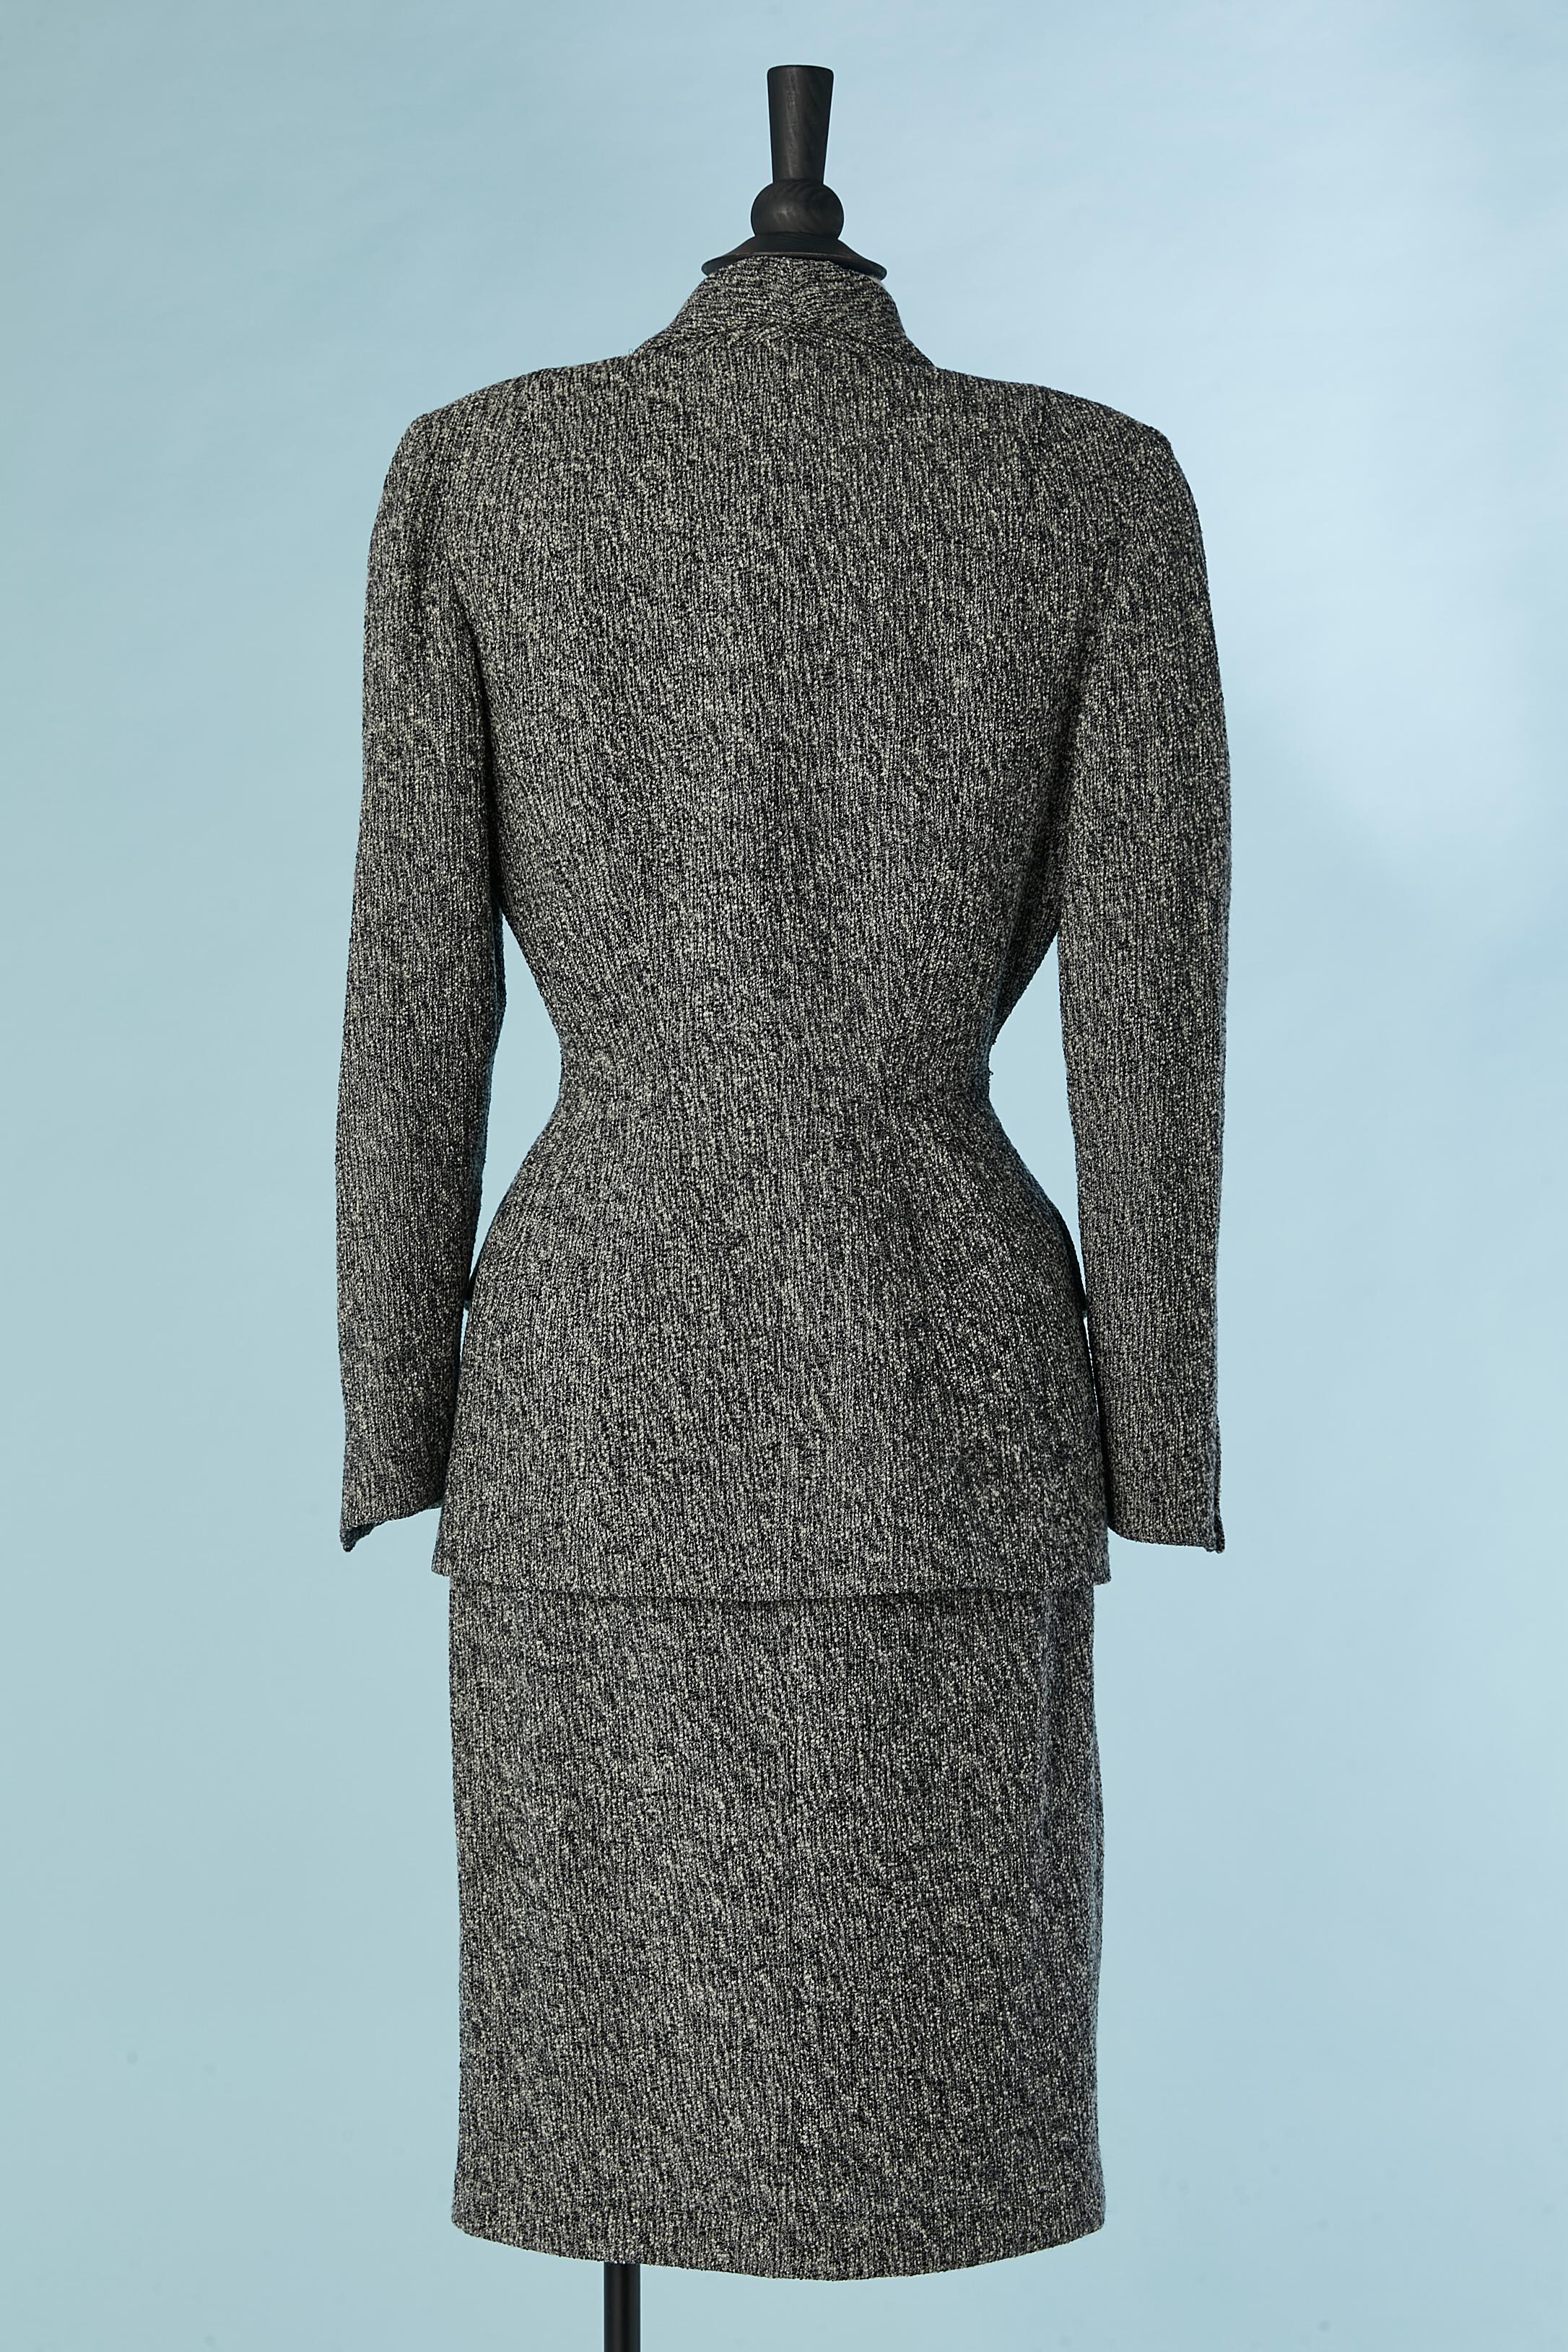 Black and ivory tweed skirt-suit Thierry Mugler Circa 1990's  For Sale 2